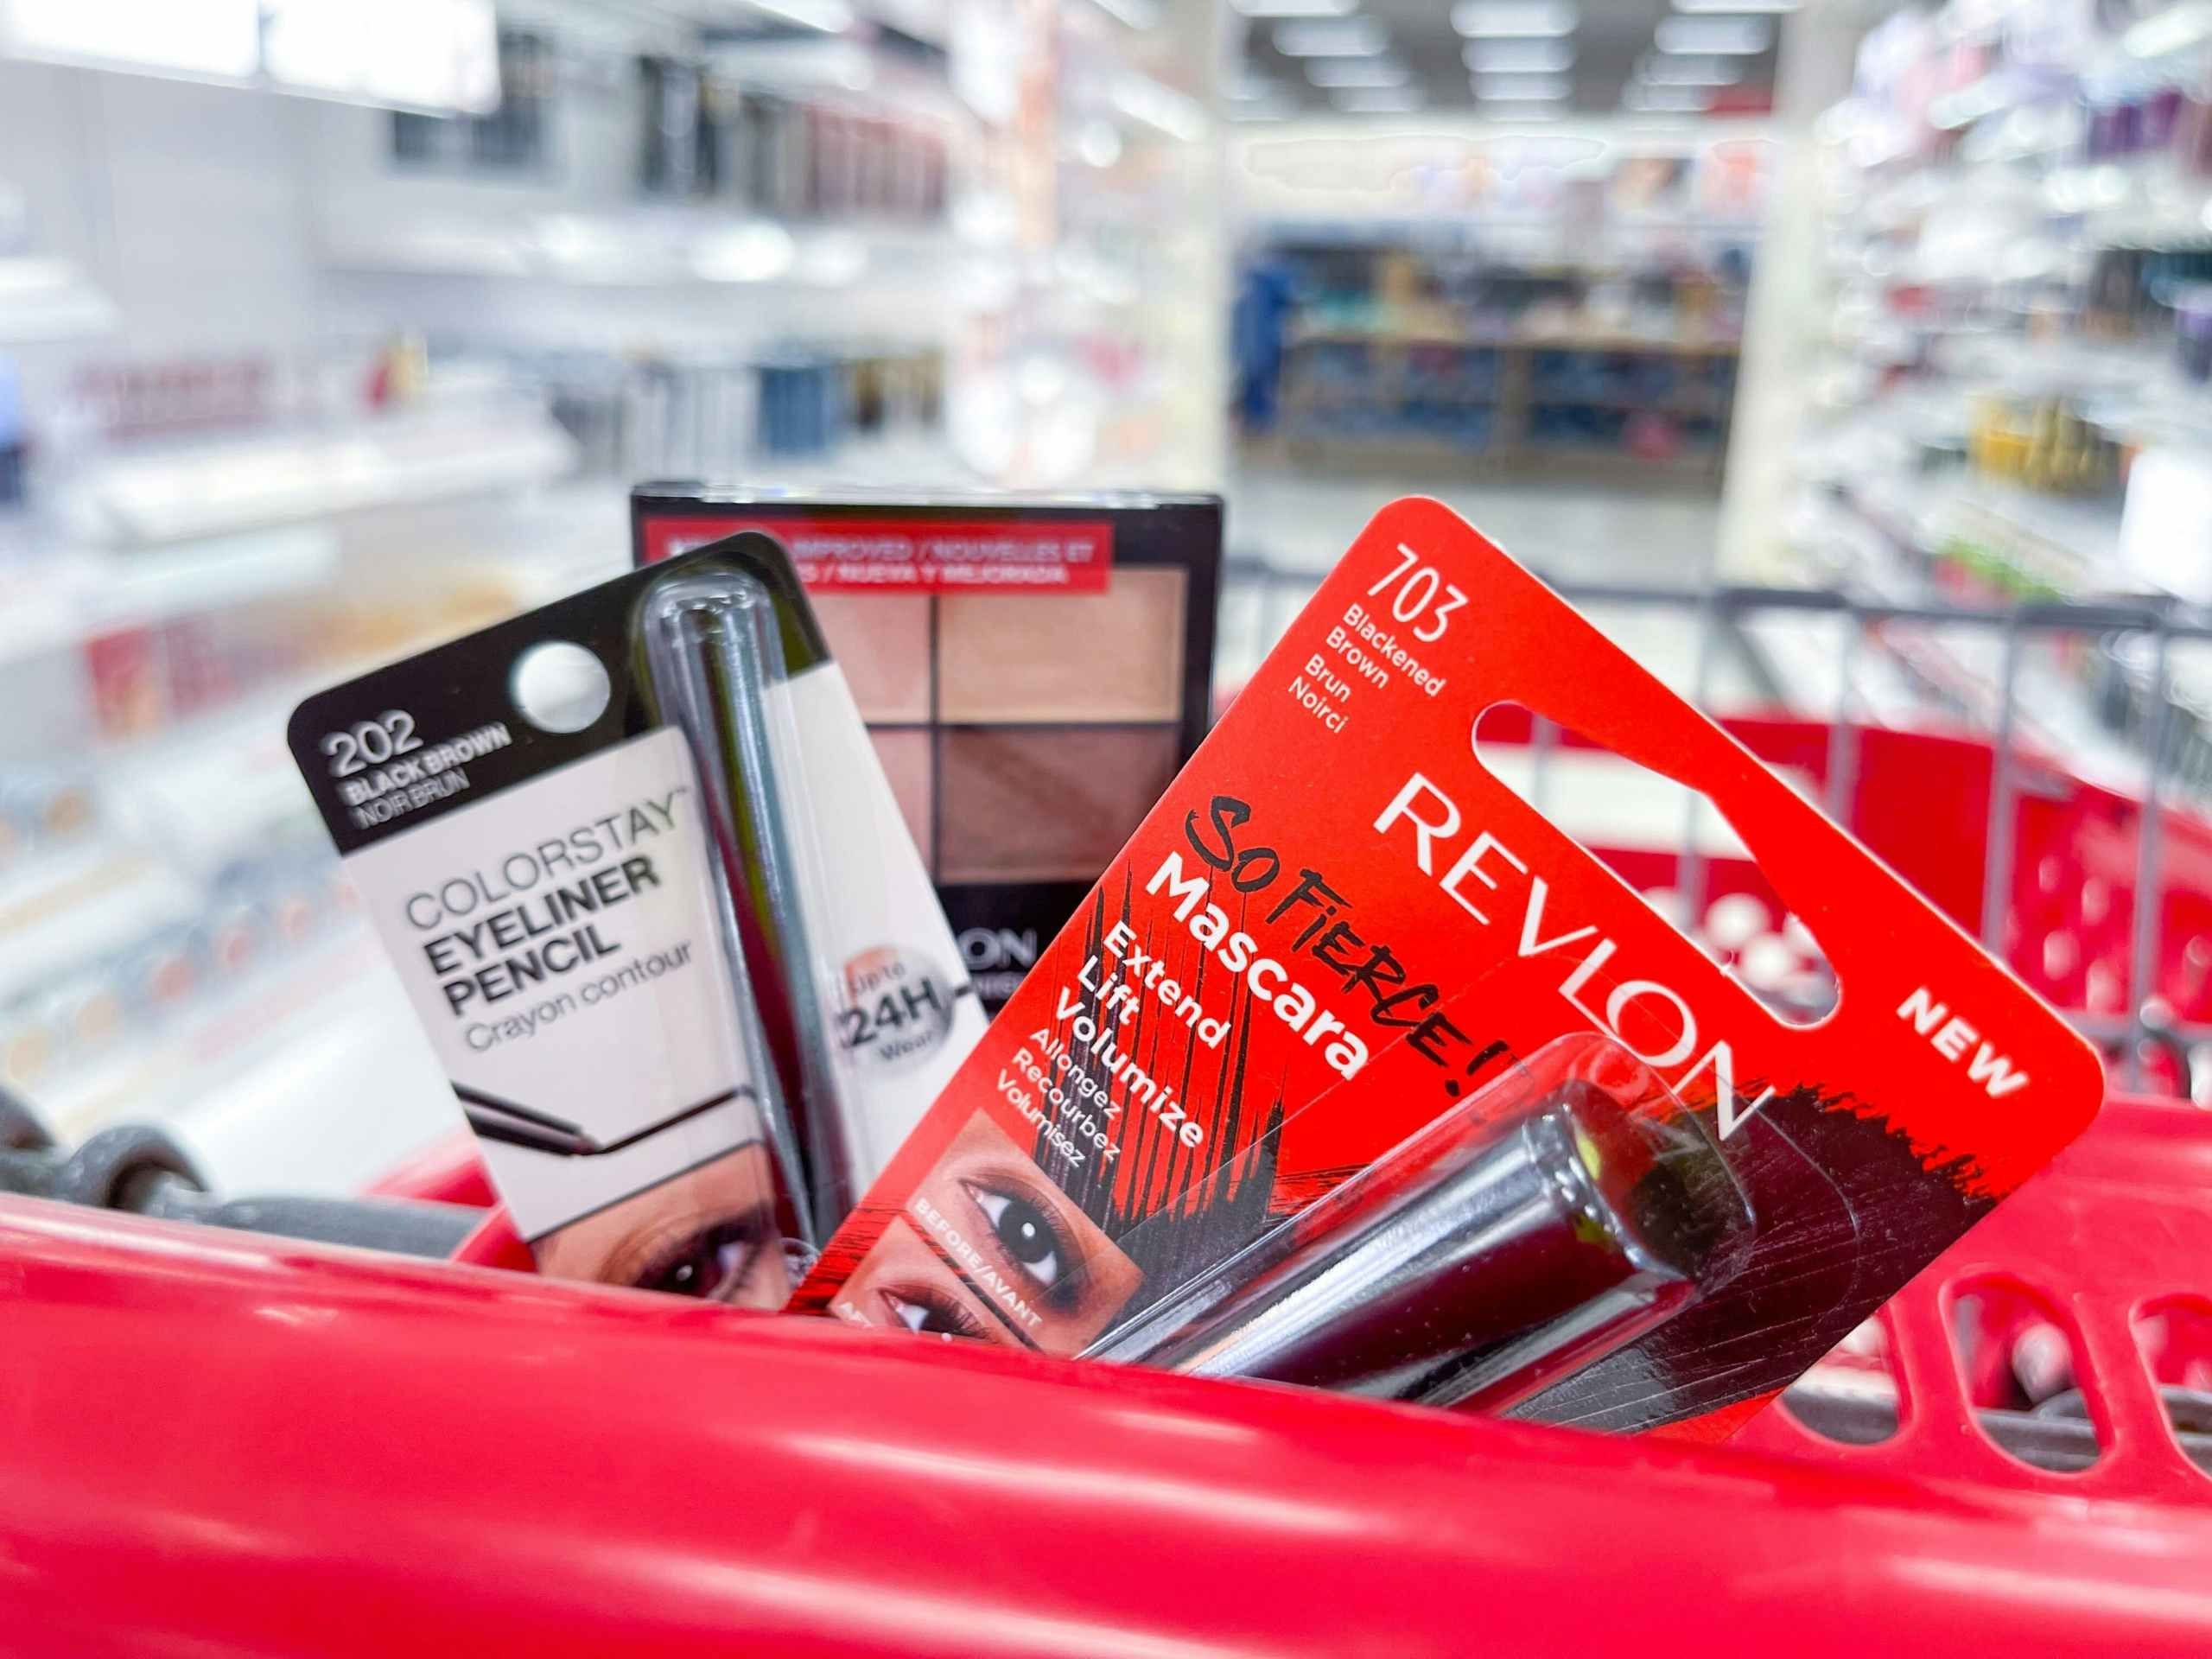 A variety of Revlon eye make up products sitting in a store cart.